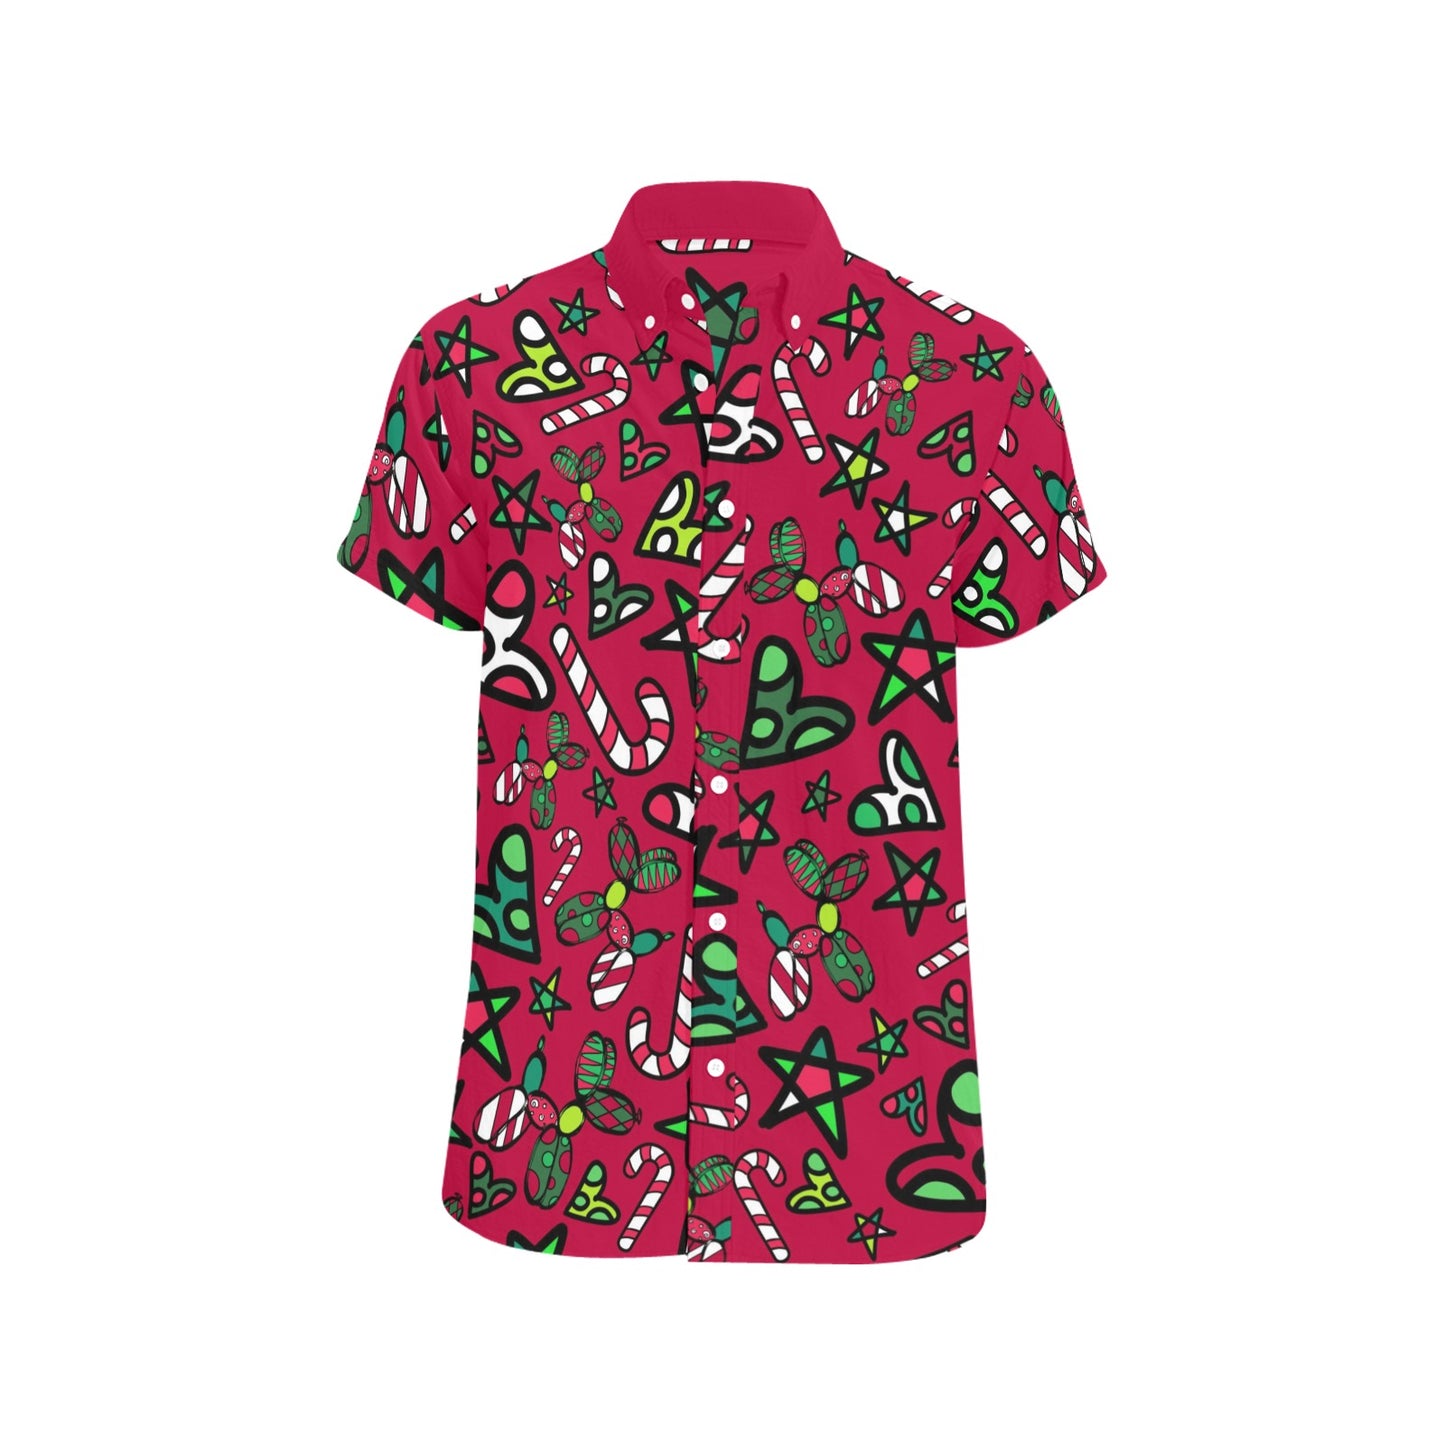 Red Christmas Shirt with Candy Canes, balloon dogs and hearts